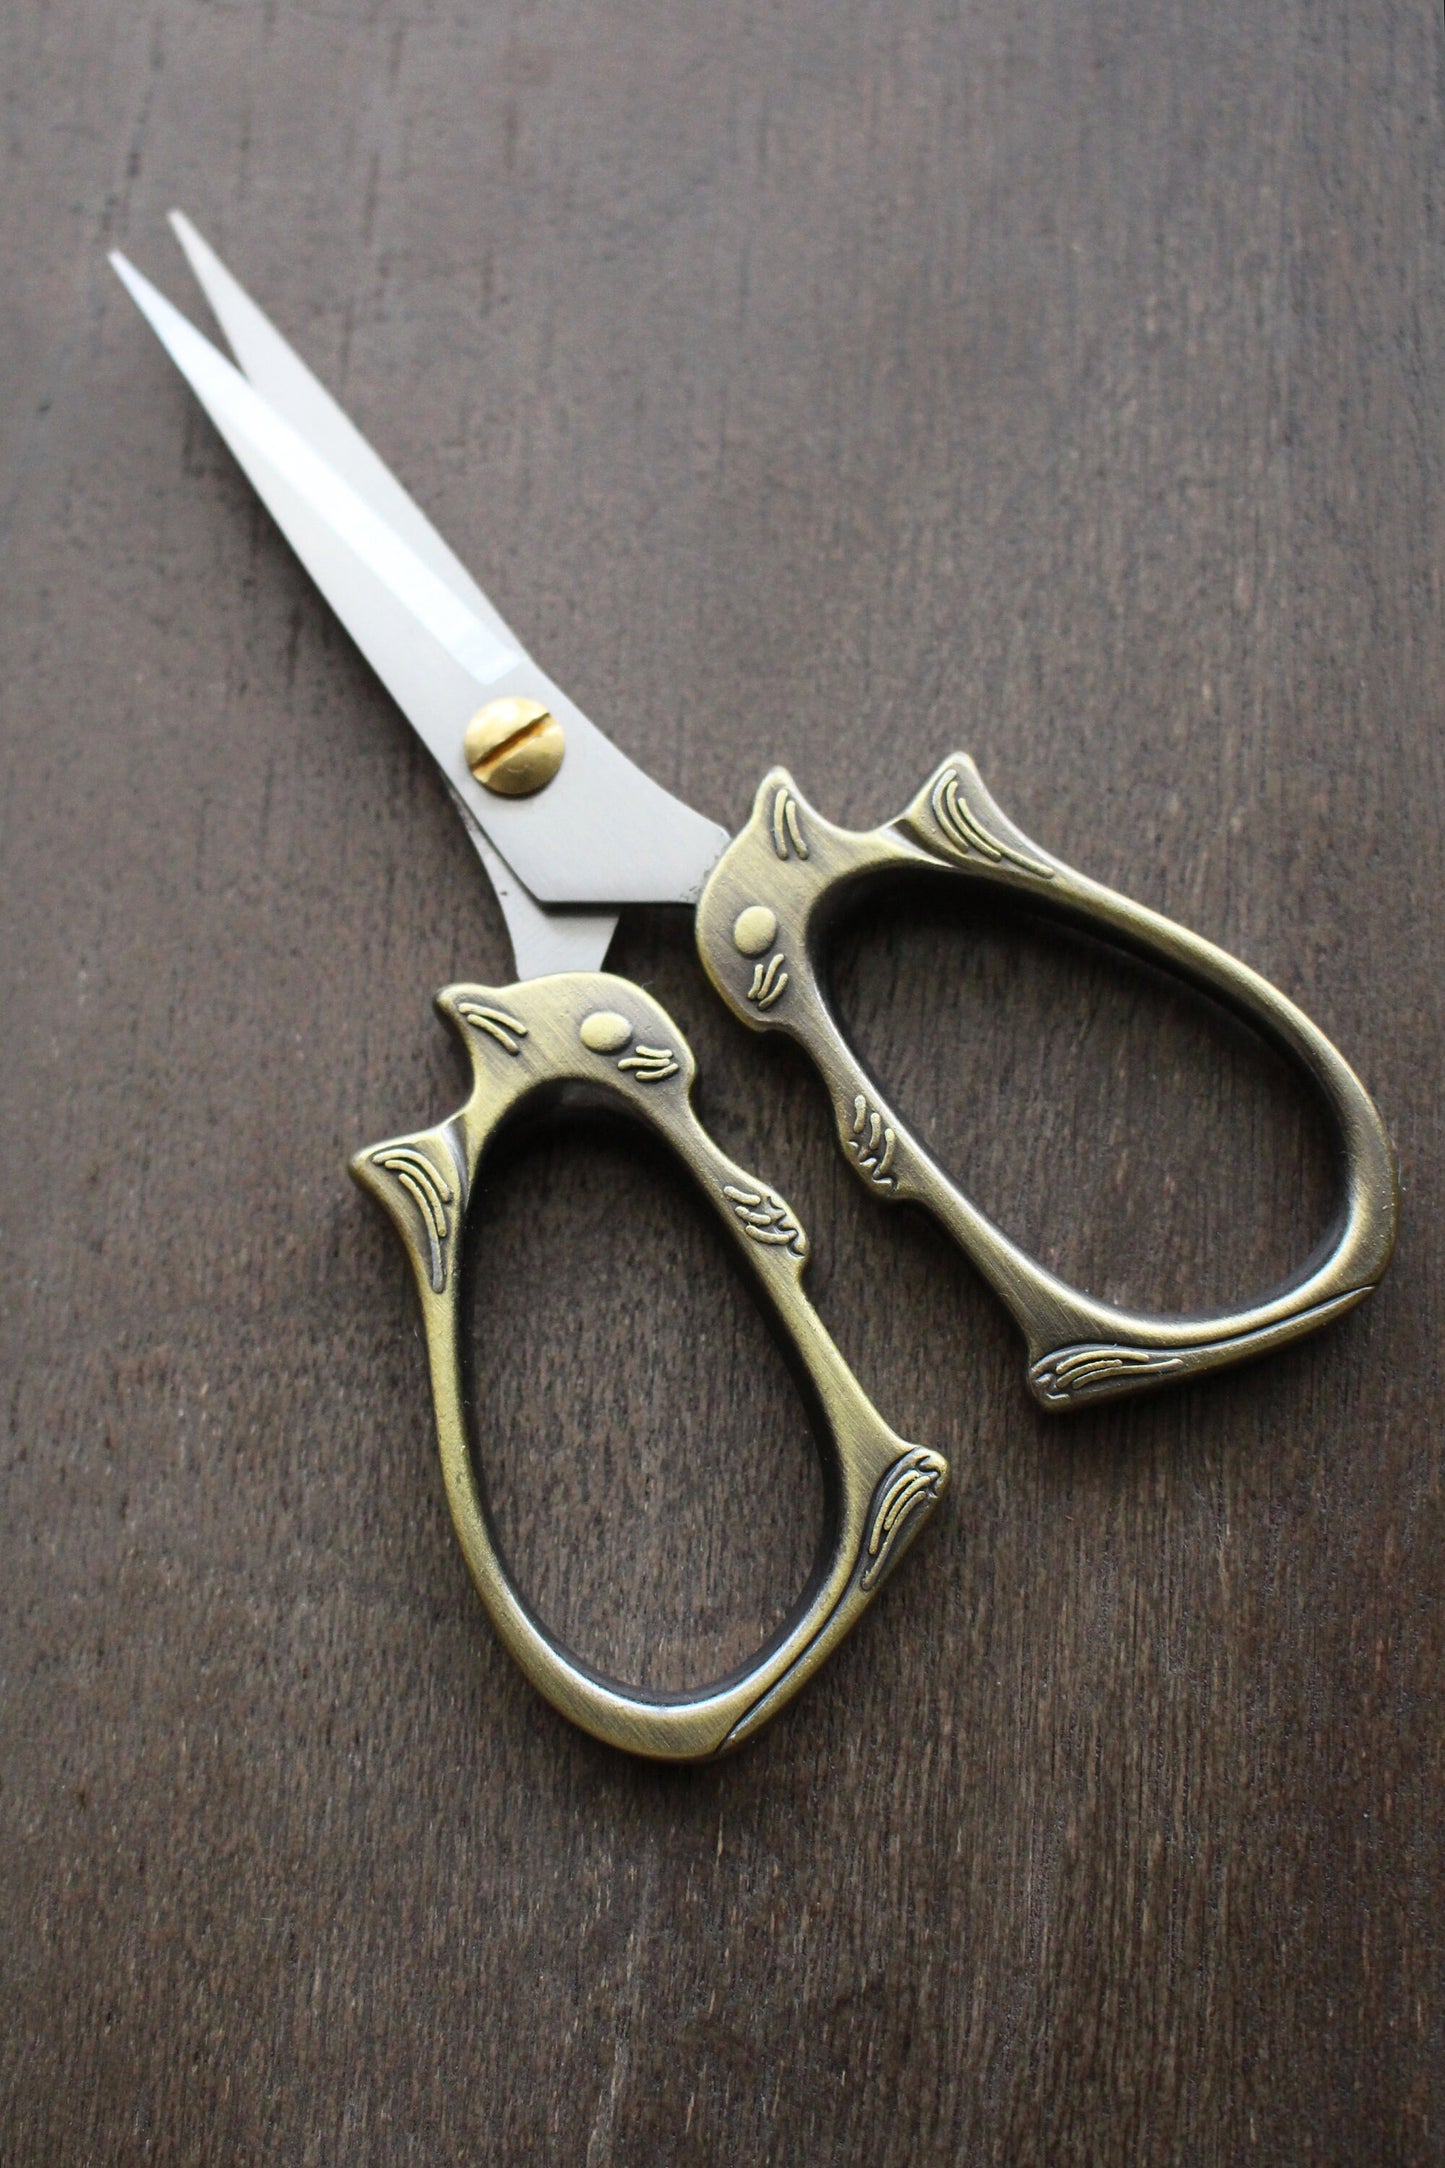 Squirrel Embroidery Scissors • Cute Forest Animal Vintage Style Quilting Scissors in Antique Gold Finish • Unique Embroidery Gift